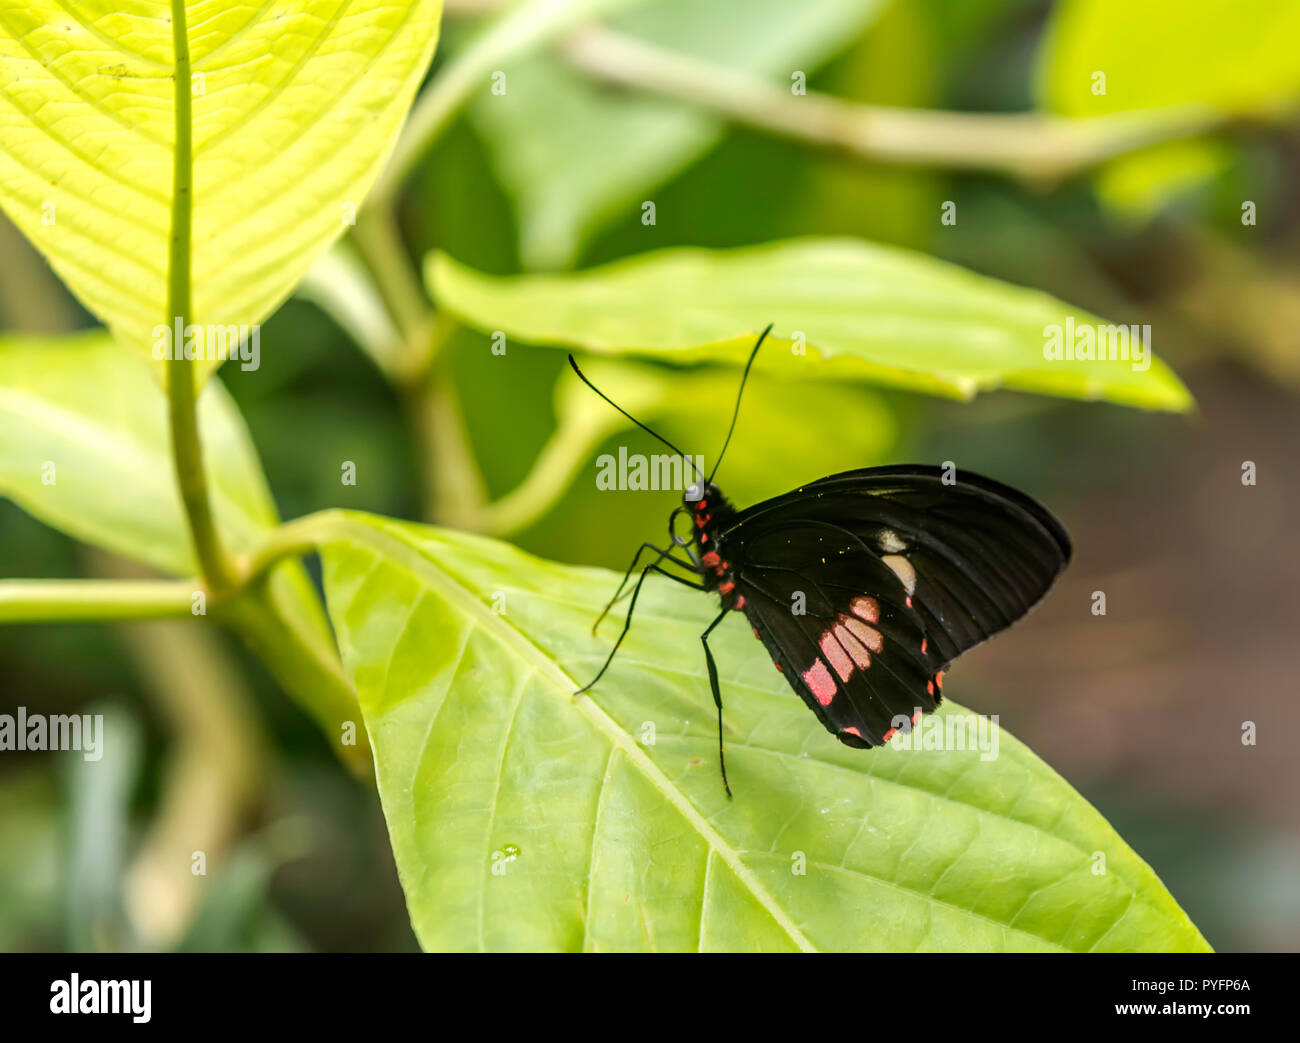 Heliconius melpomene, the postman butterfly, common postman or simply postman, sitting on the green leaf, ventral view. Stock Photo